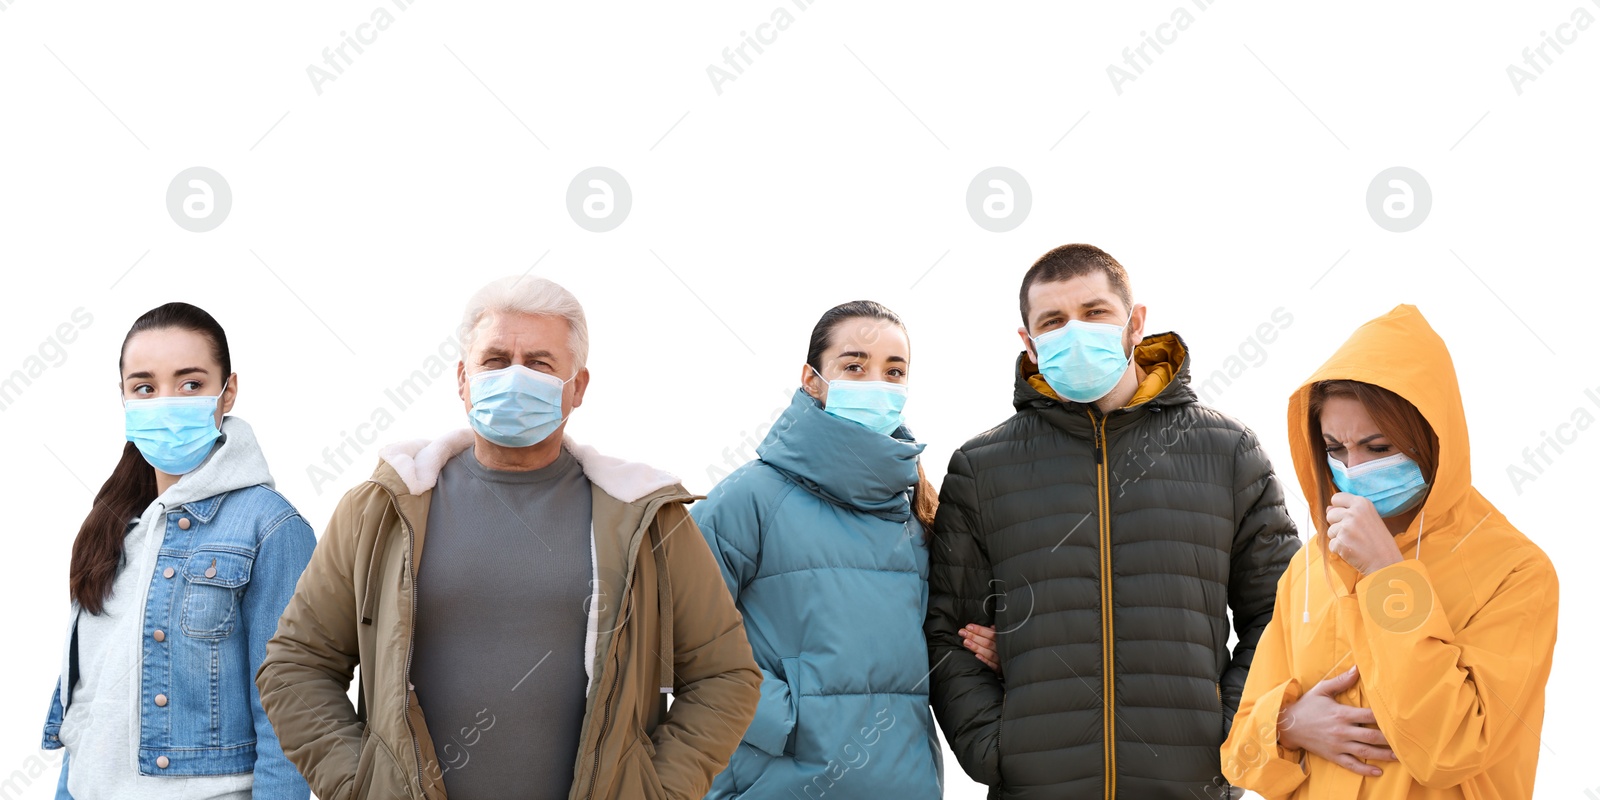 Image of Collage of people wearing medical face masks on white background. Virus protection